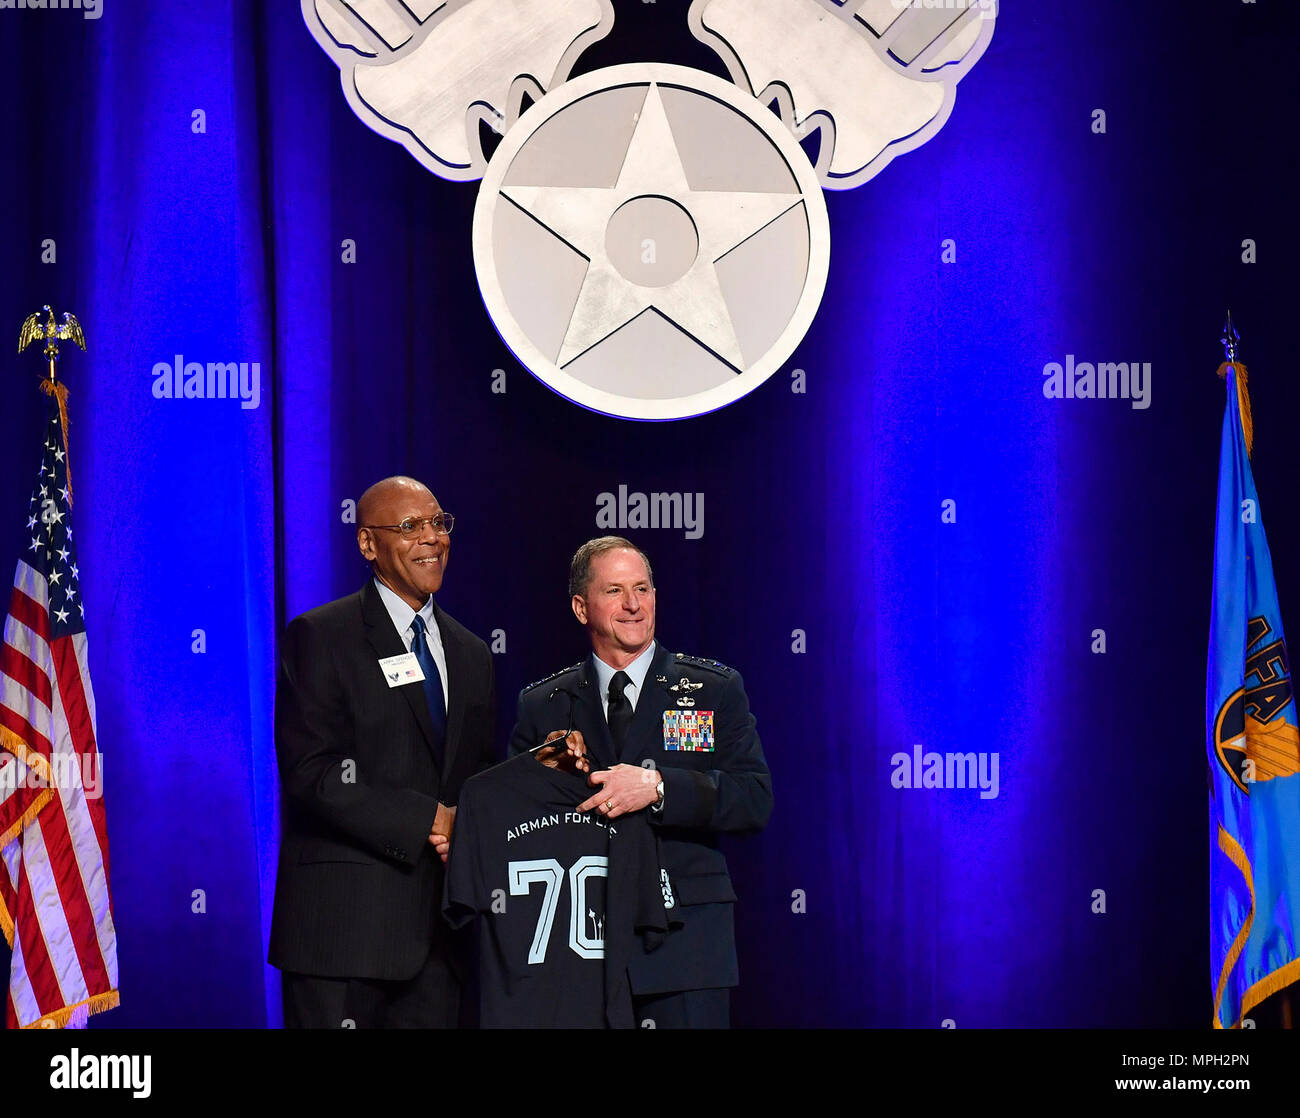 Air Force Chief of Staff Gen. David L. Goldfein receives an 'Airman for Life' T-shrt from AFA president Gen. (ret.) Larry O. Spencer, following his 'Air Force Update,' at the Air Force Association Air Warfare Symposium March 2, 2016, in Orlando, Fla.  (U.S. Air Force photo/Scott M. Ash) Stock Photo